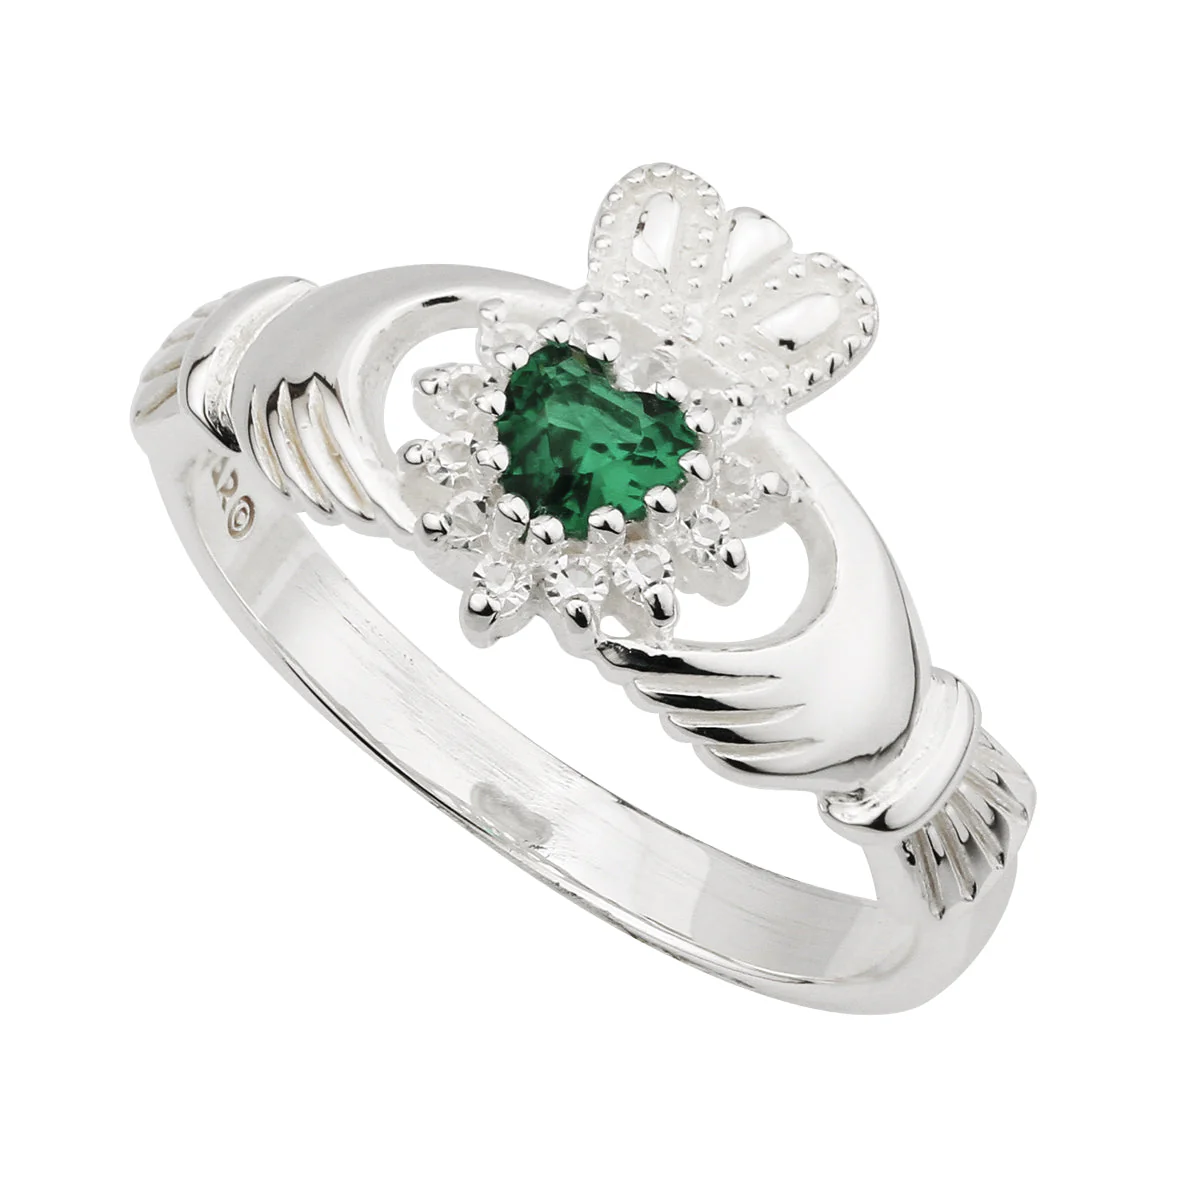 Silver Claddagh Ring With Green Crystal Heart